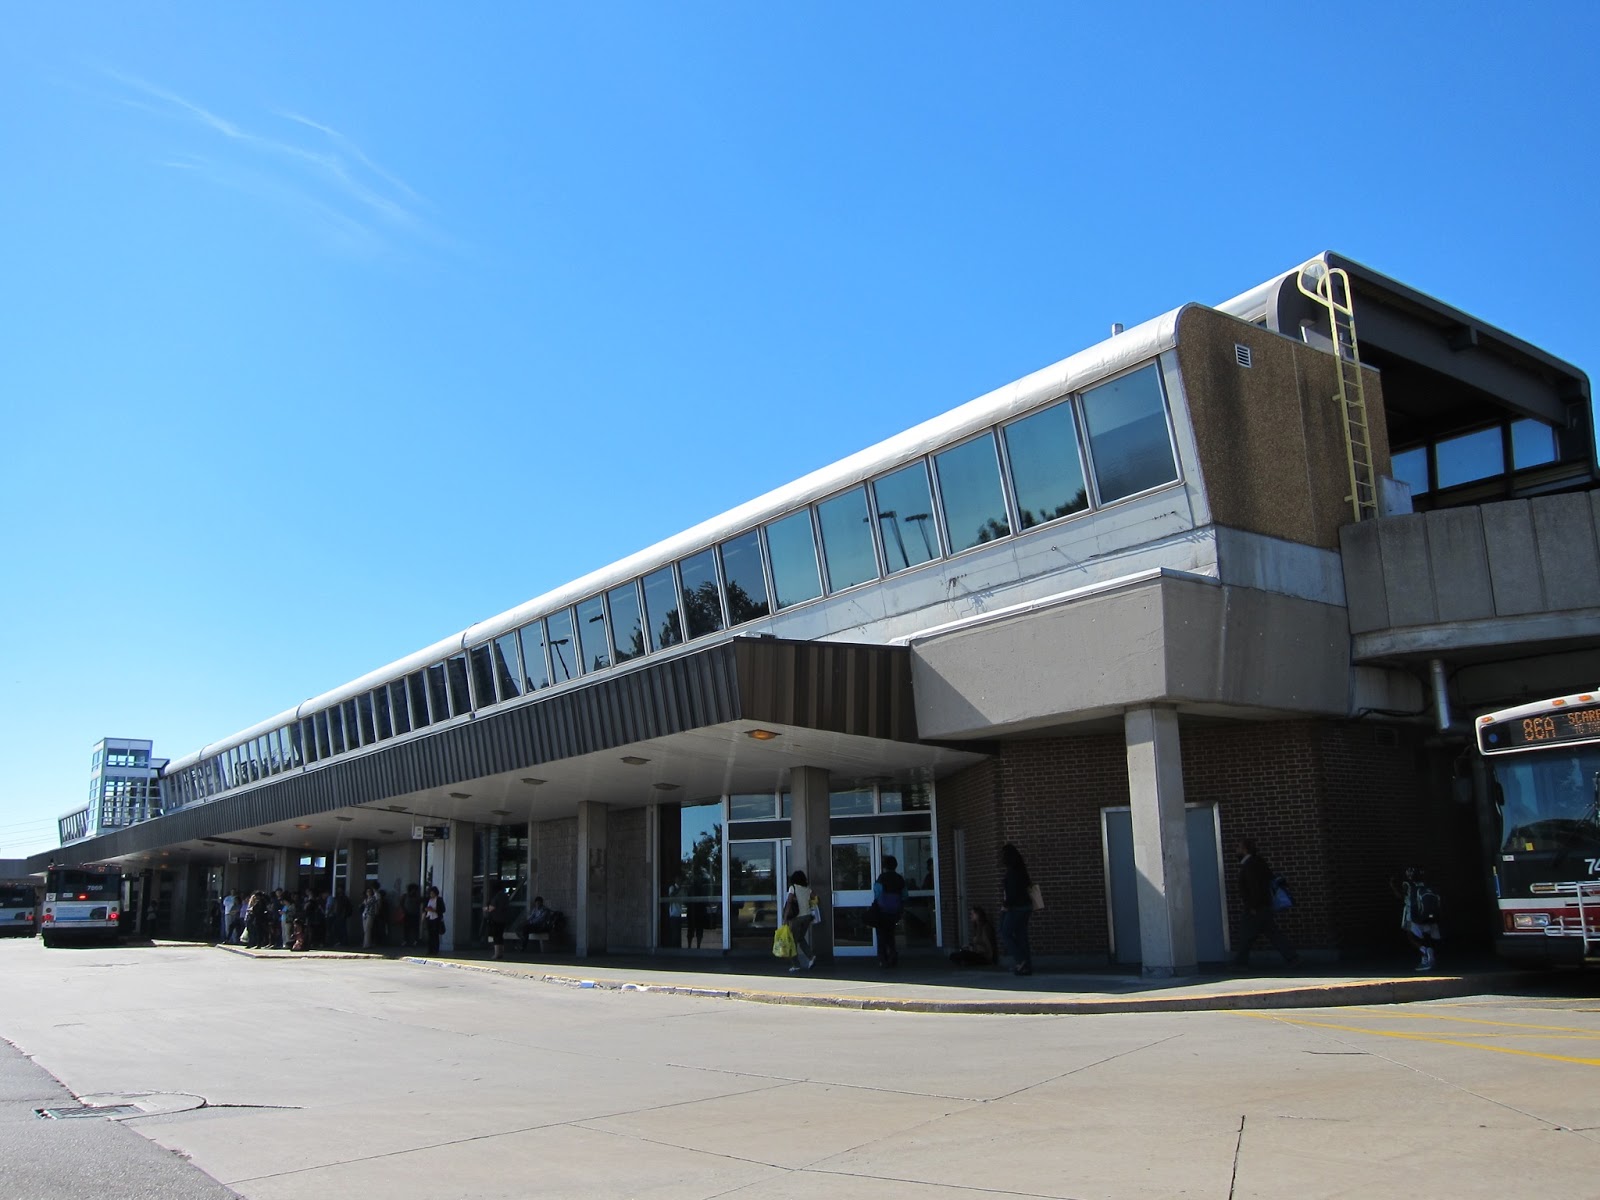 Kennedy station exterior